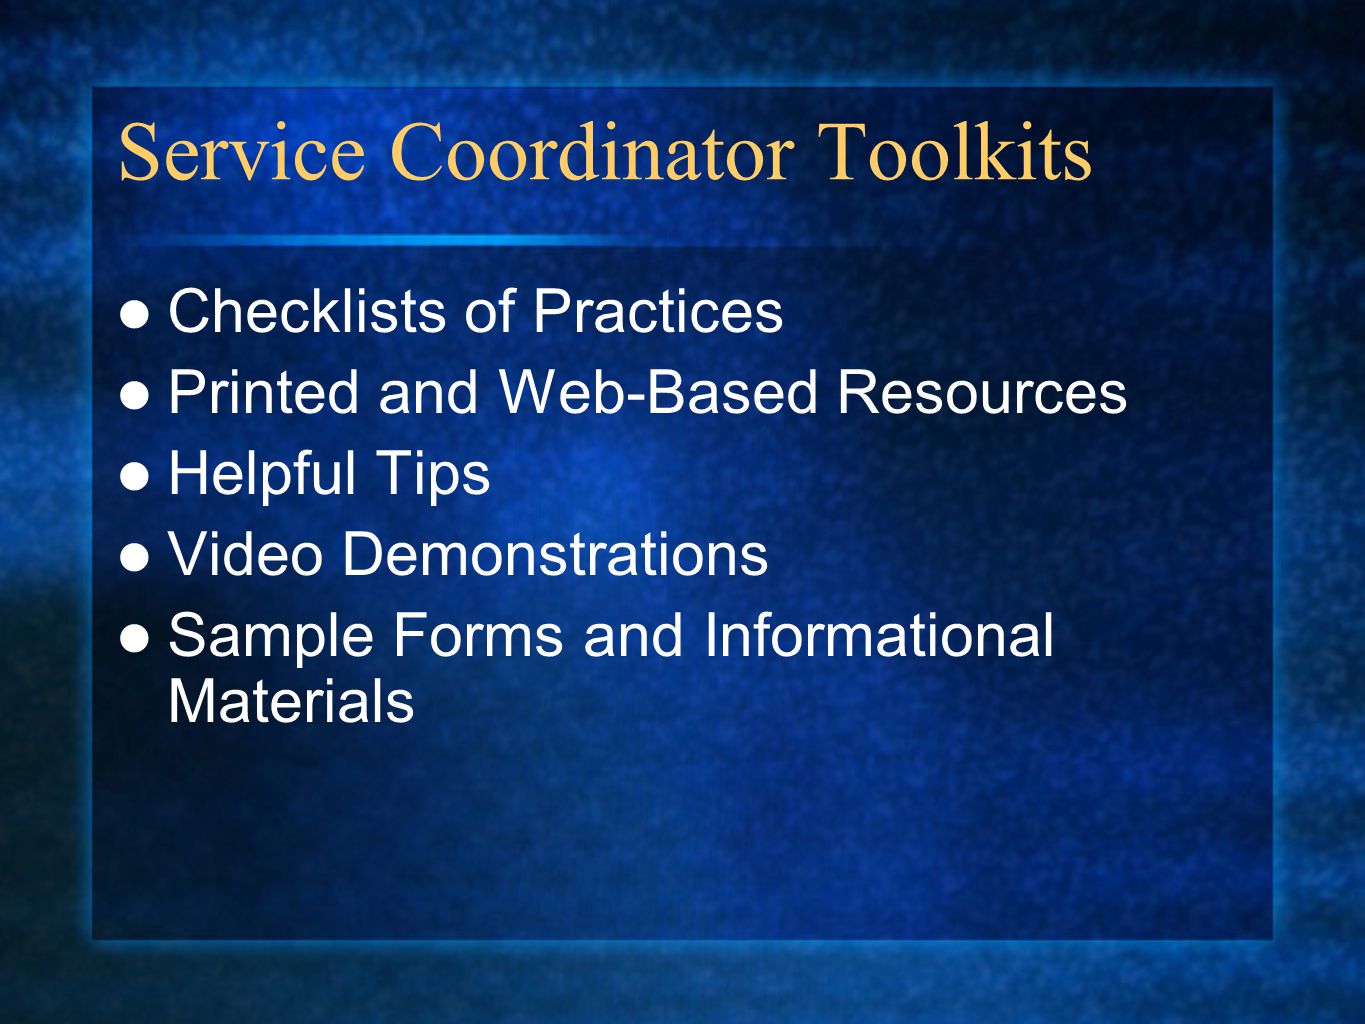 Service Coordinator Toolkits Checklists of Practices Printed and Web-Based Resources Helpful Tips Video Demonstrations Sample Forms and Informational Materials